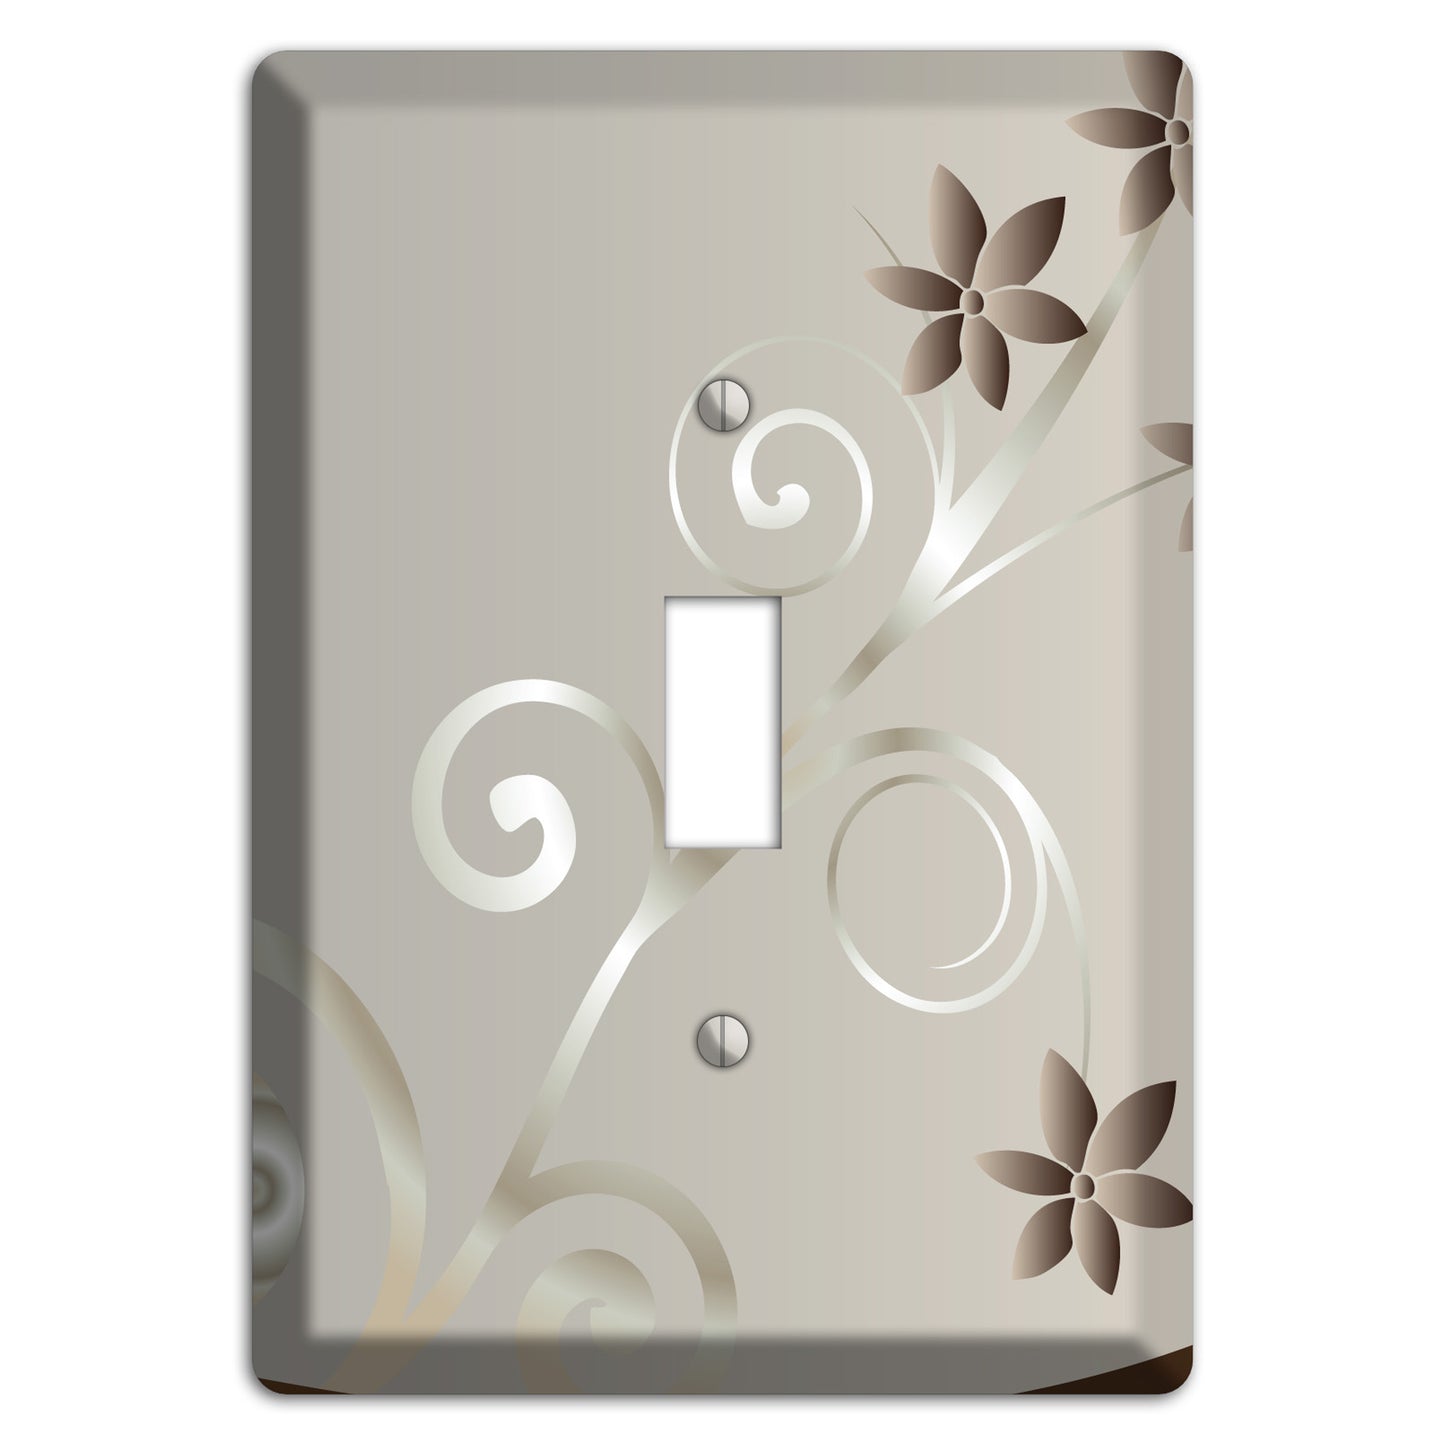 Grey Floral Swirl Sprig Cover Plates